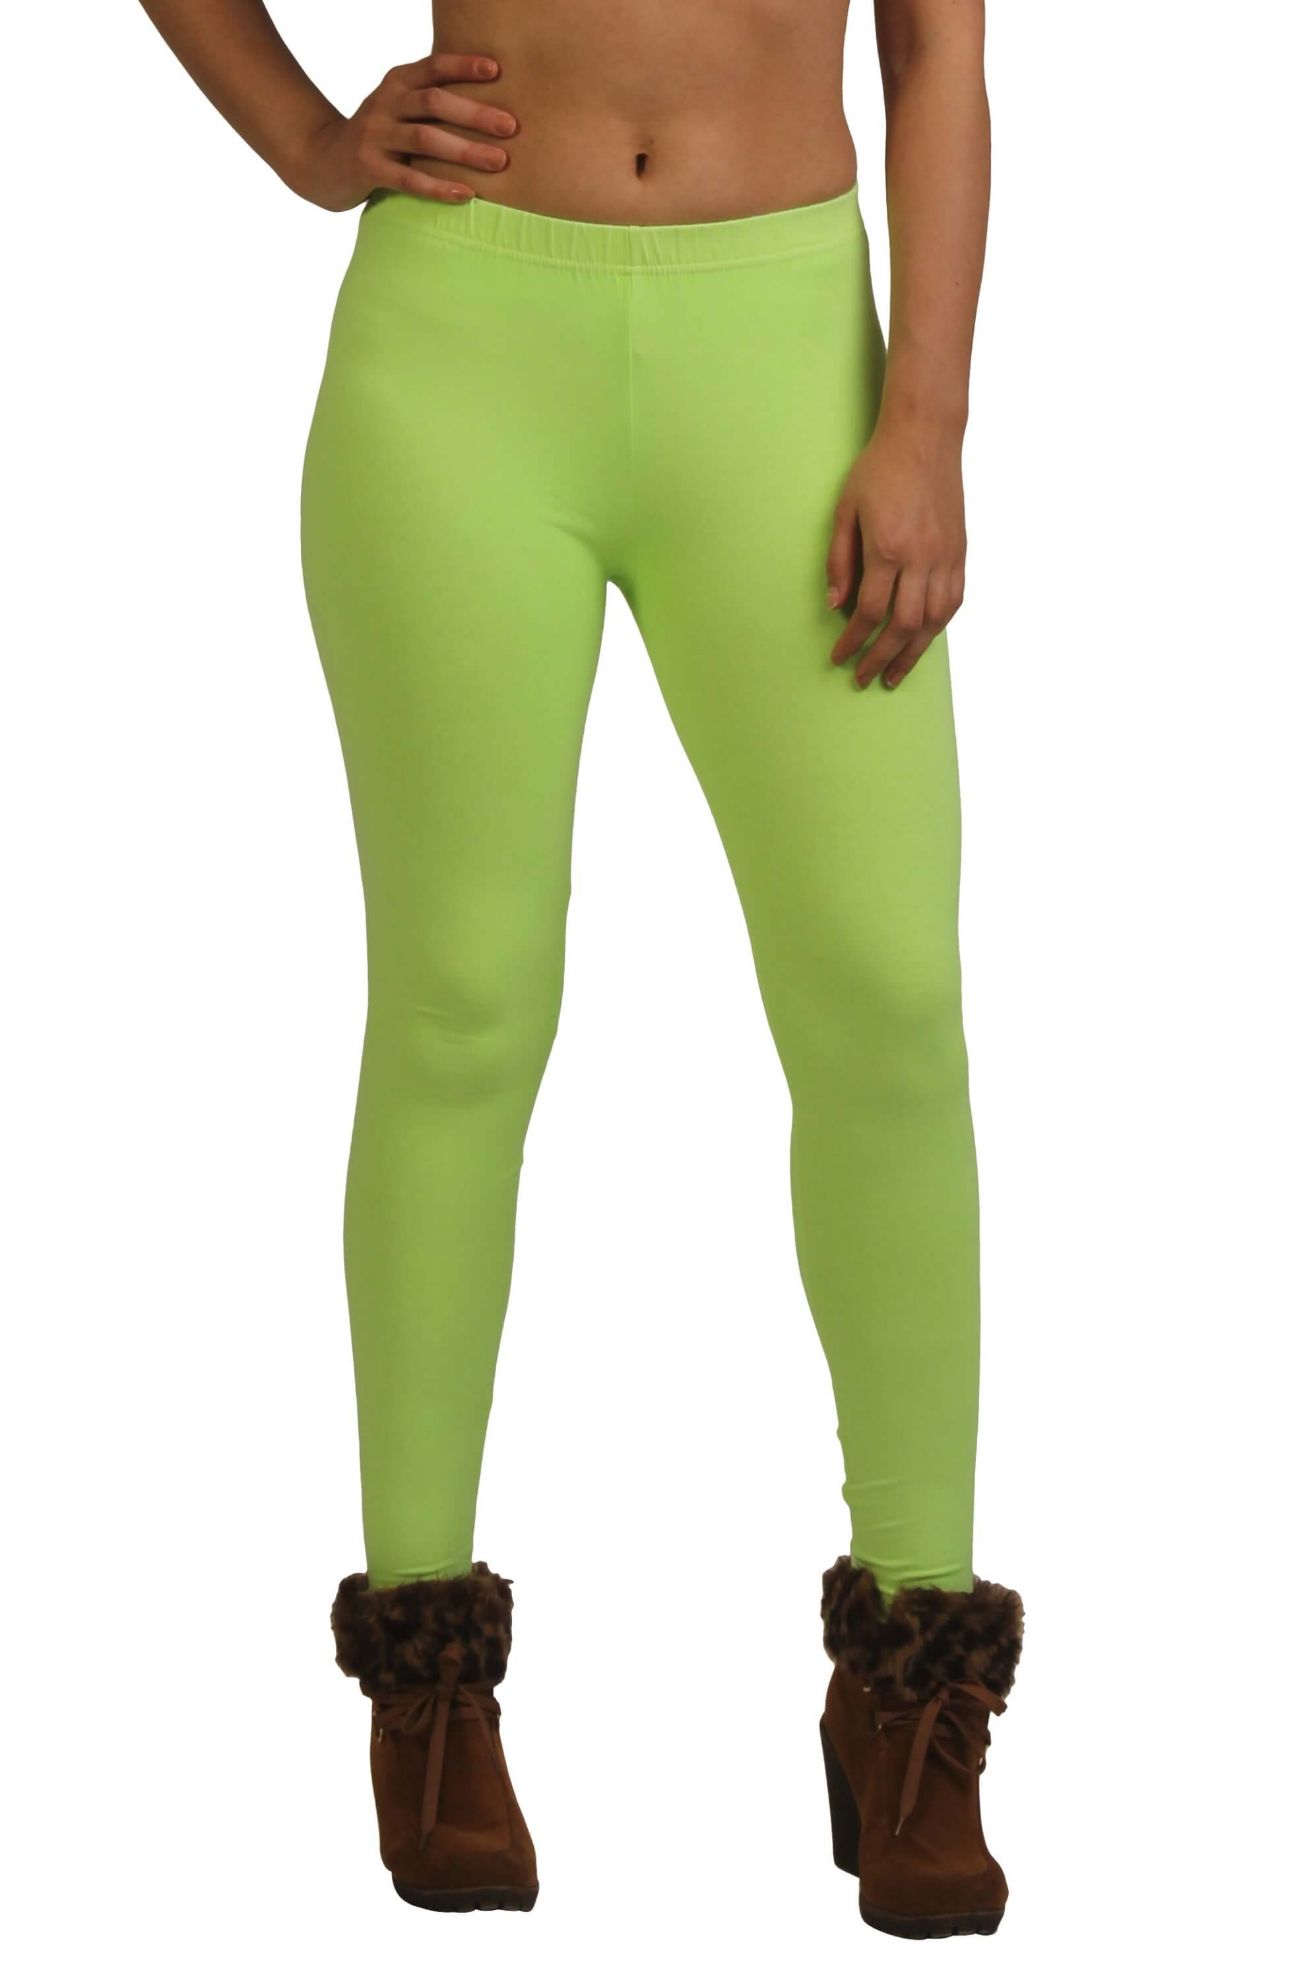 Frenchtrendz  Buy Frenchtrendz Cotton Spandex Neon Green Ankle Leggings  Online India